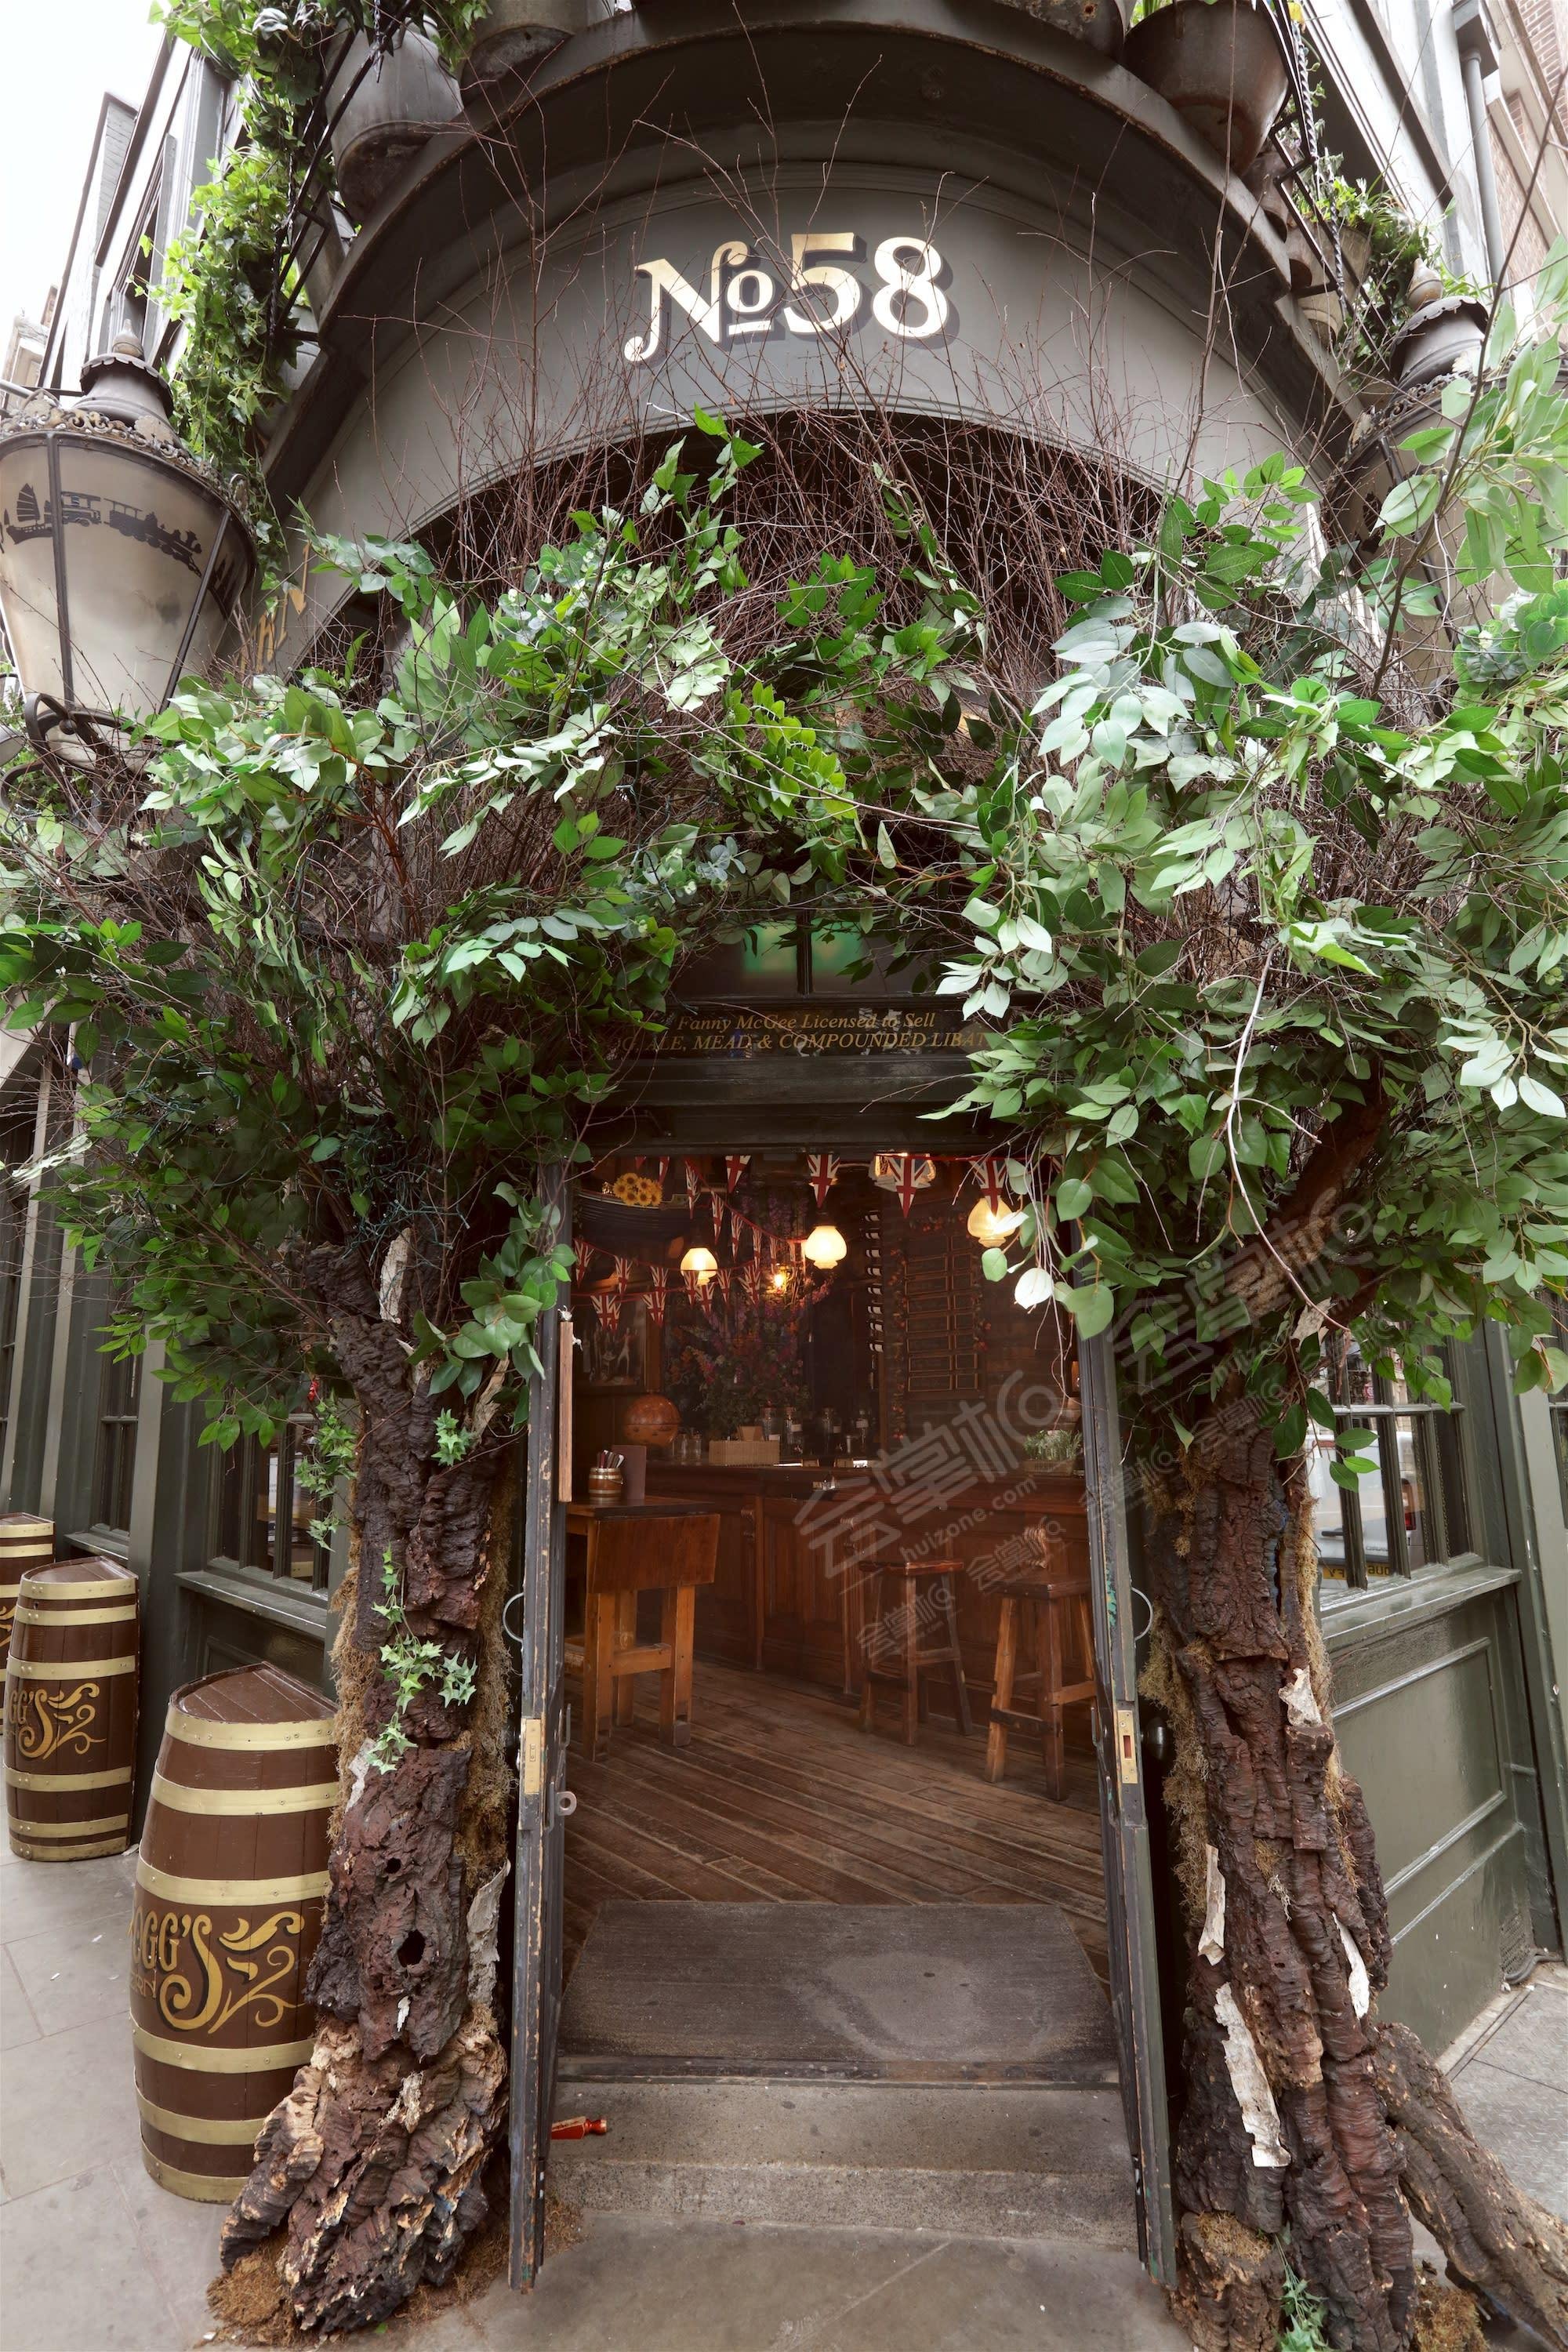 Classic British Wood-Panelled, Old-Style Tavern near Covent Garden - minimum spend applies